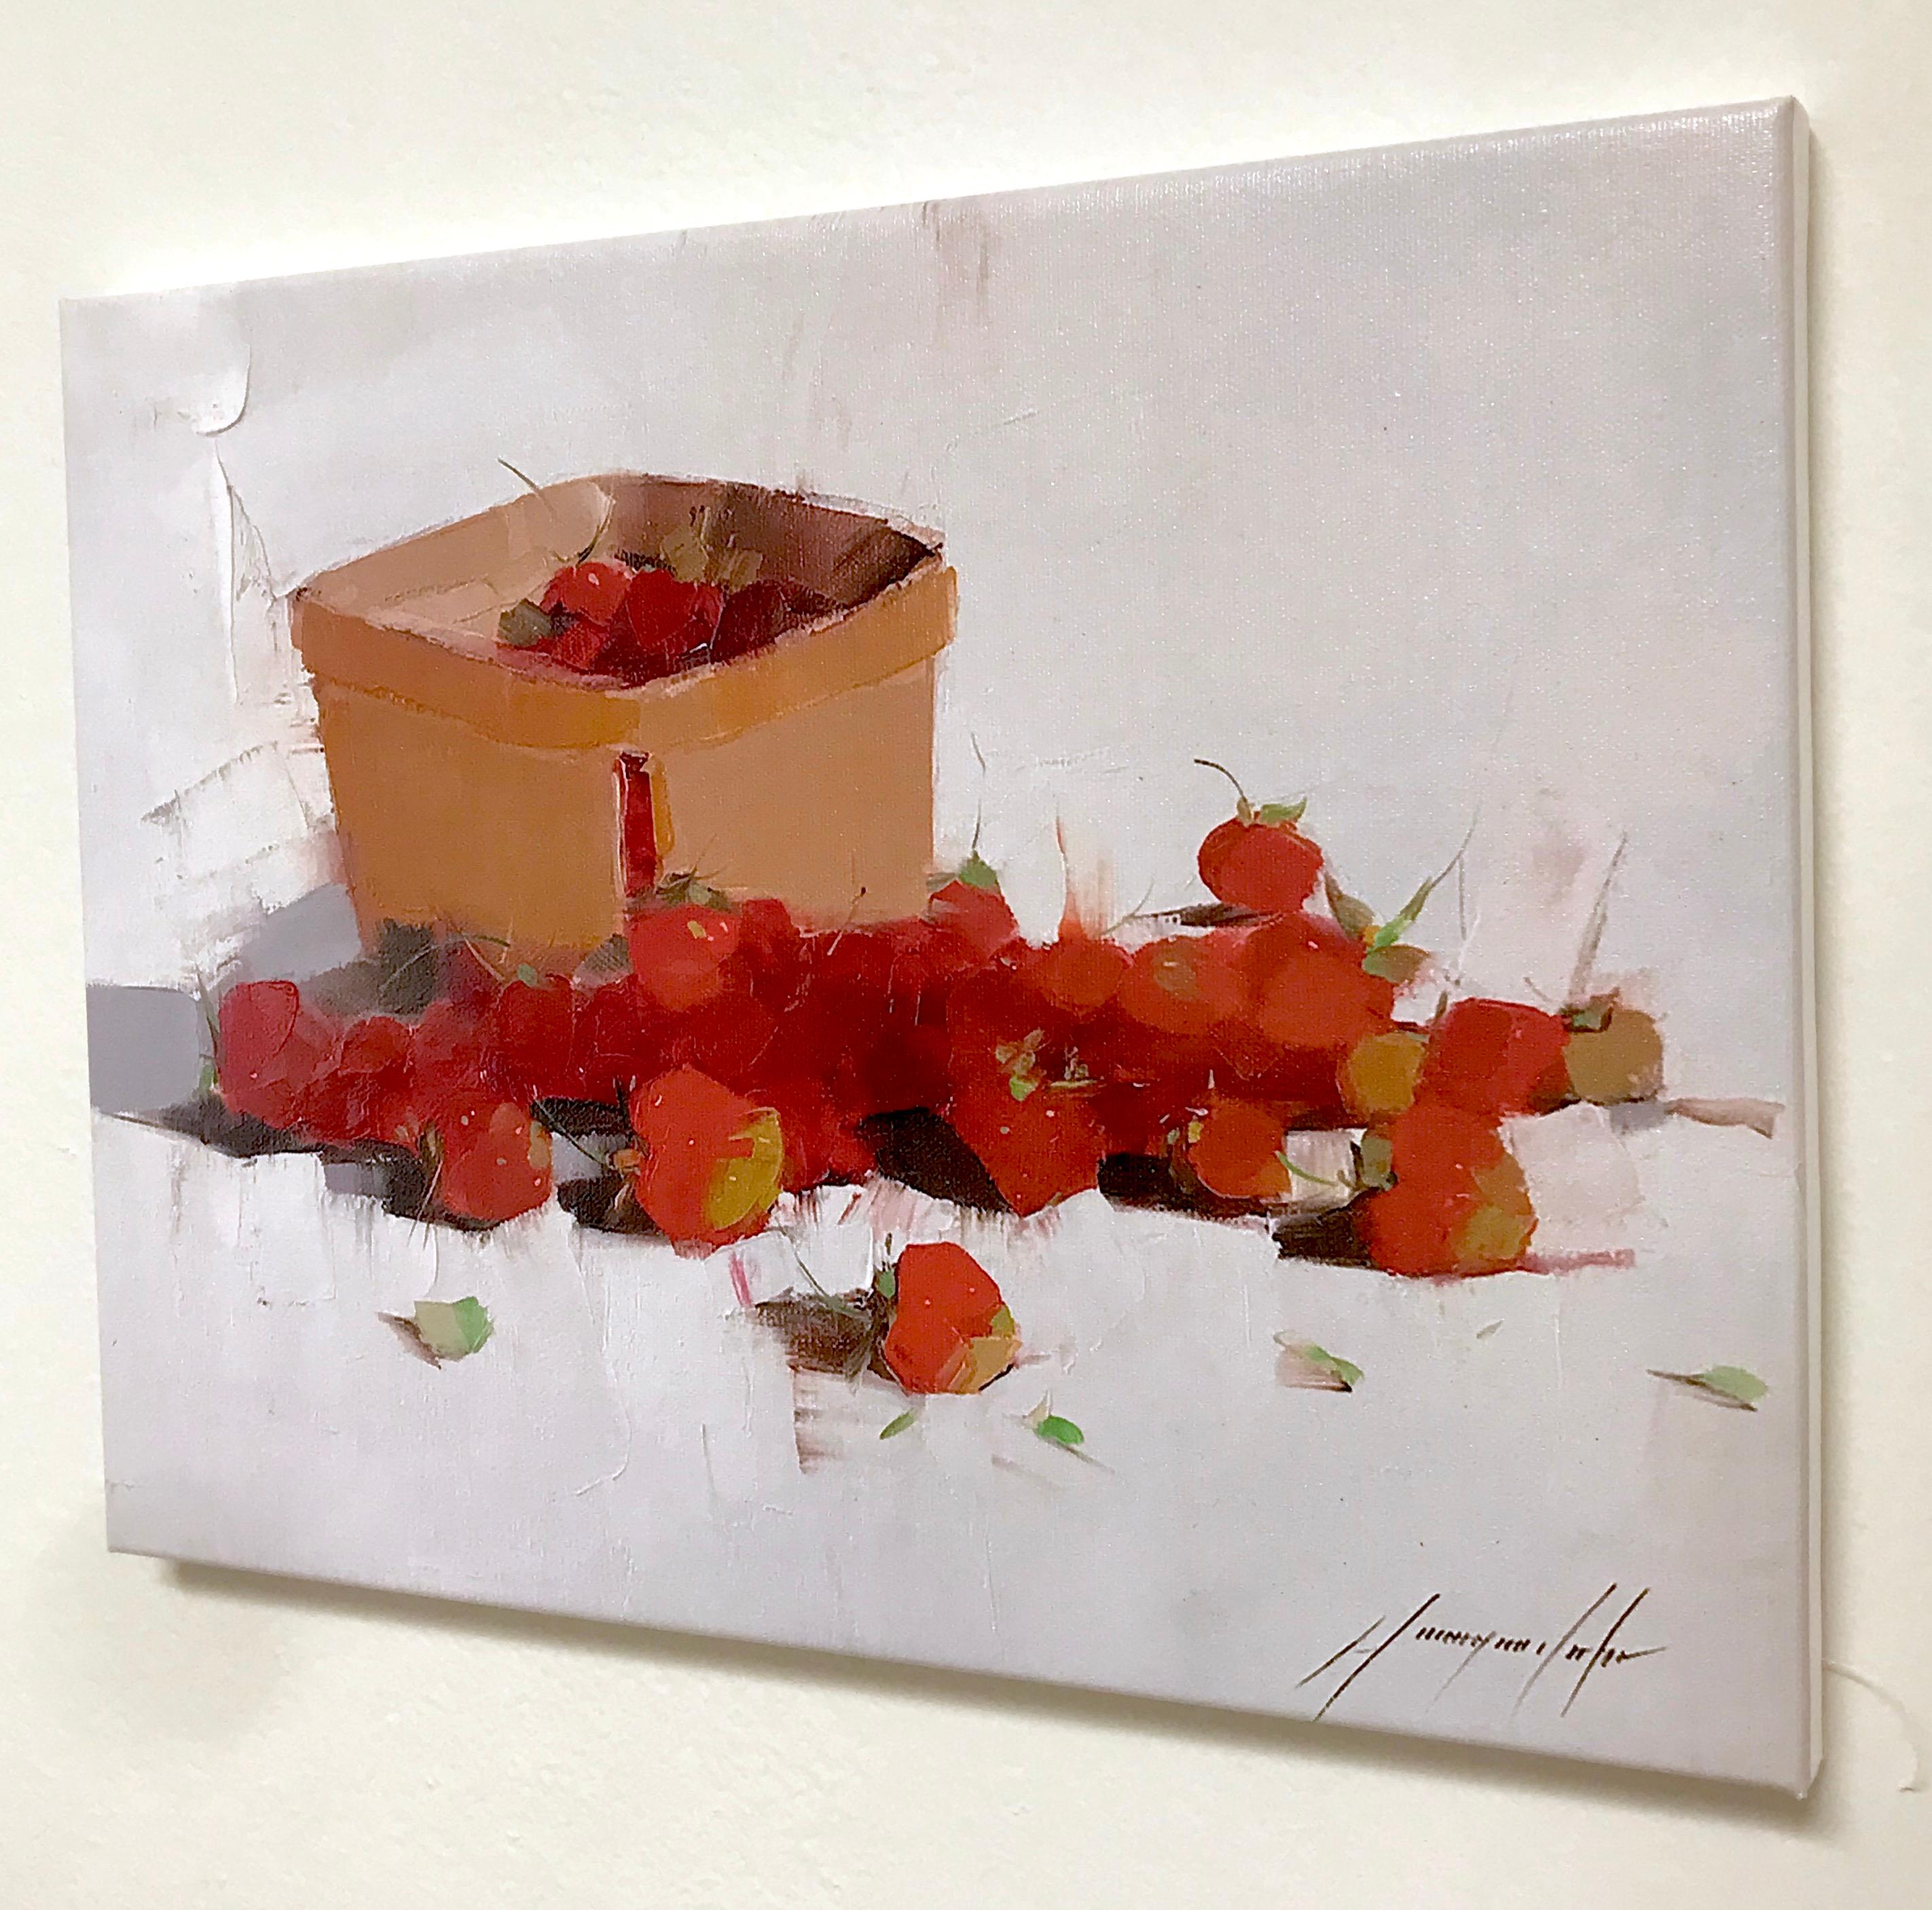 Strawberries Print on Canvas - Impressionist Painting by Vahe Yeremyan